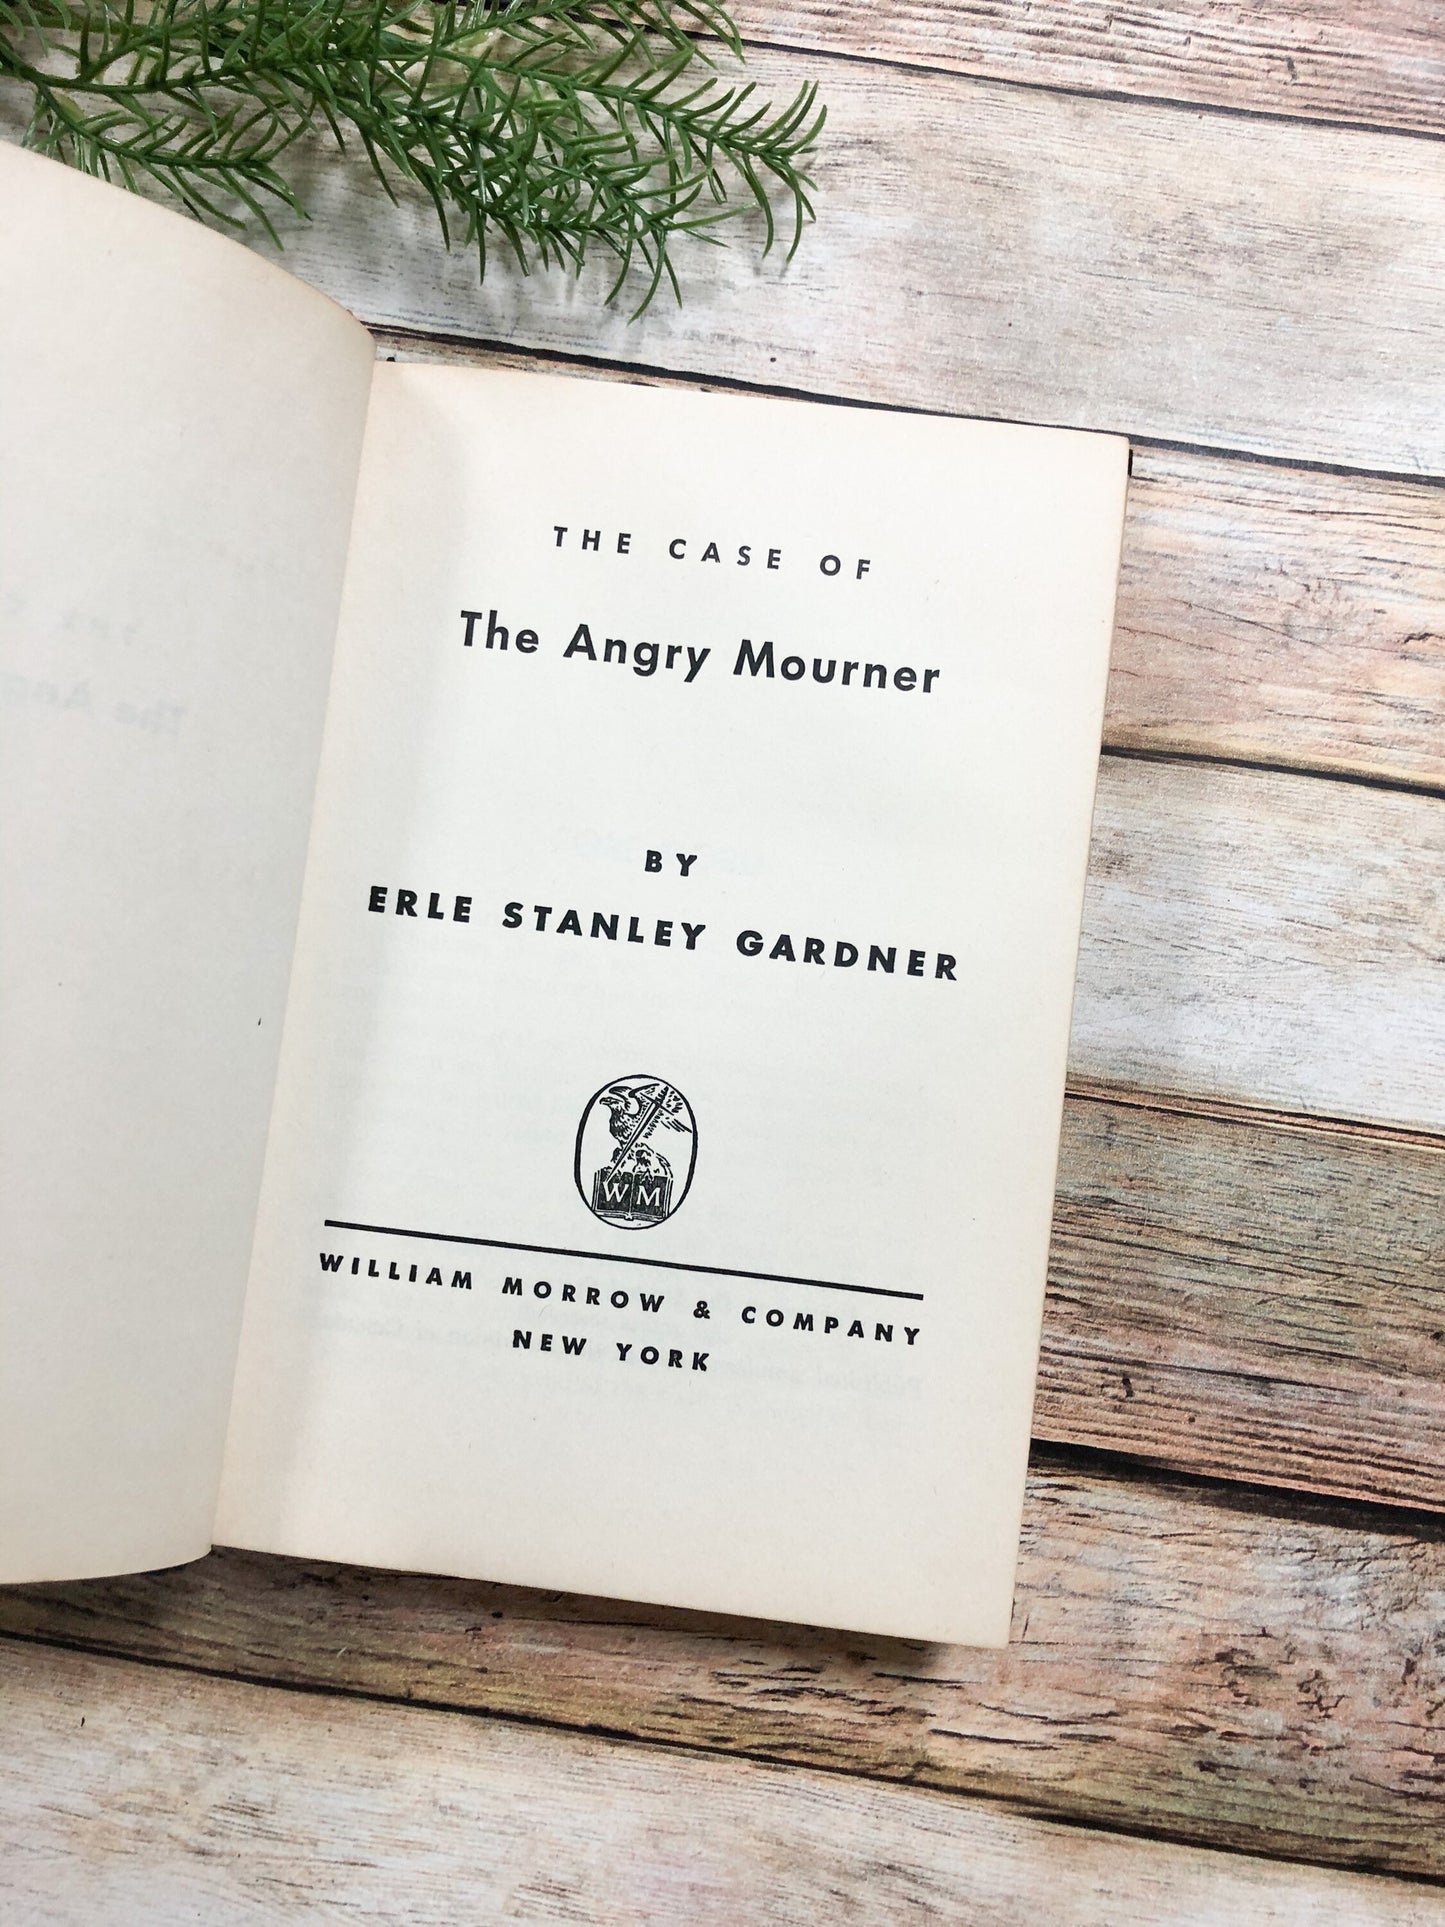 First Edition Erle Stanley Gardner, The Case of the Angry Mourner